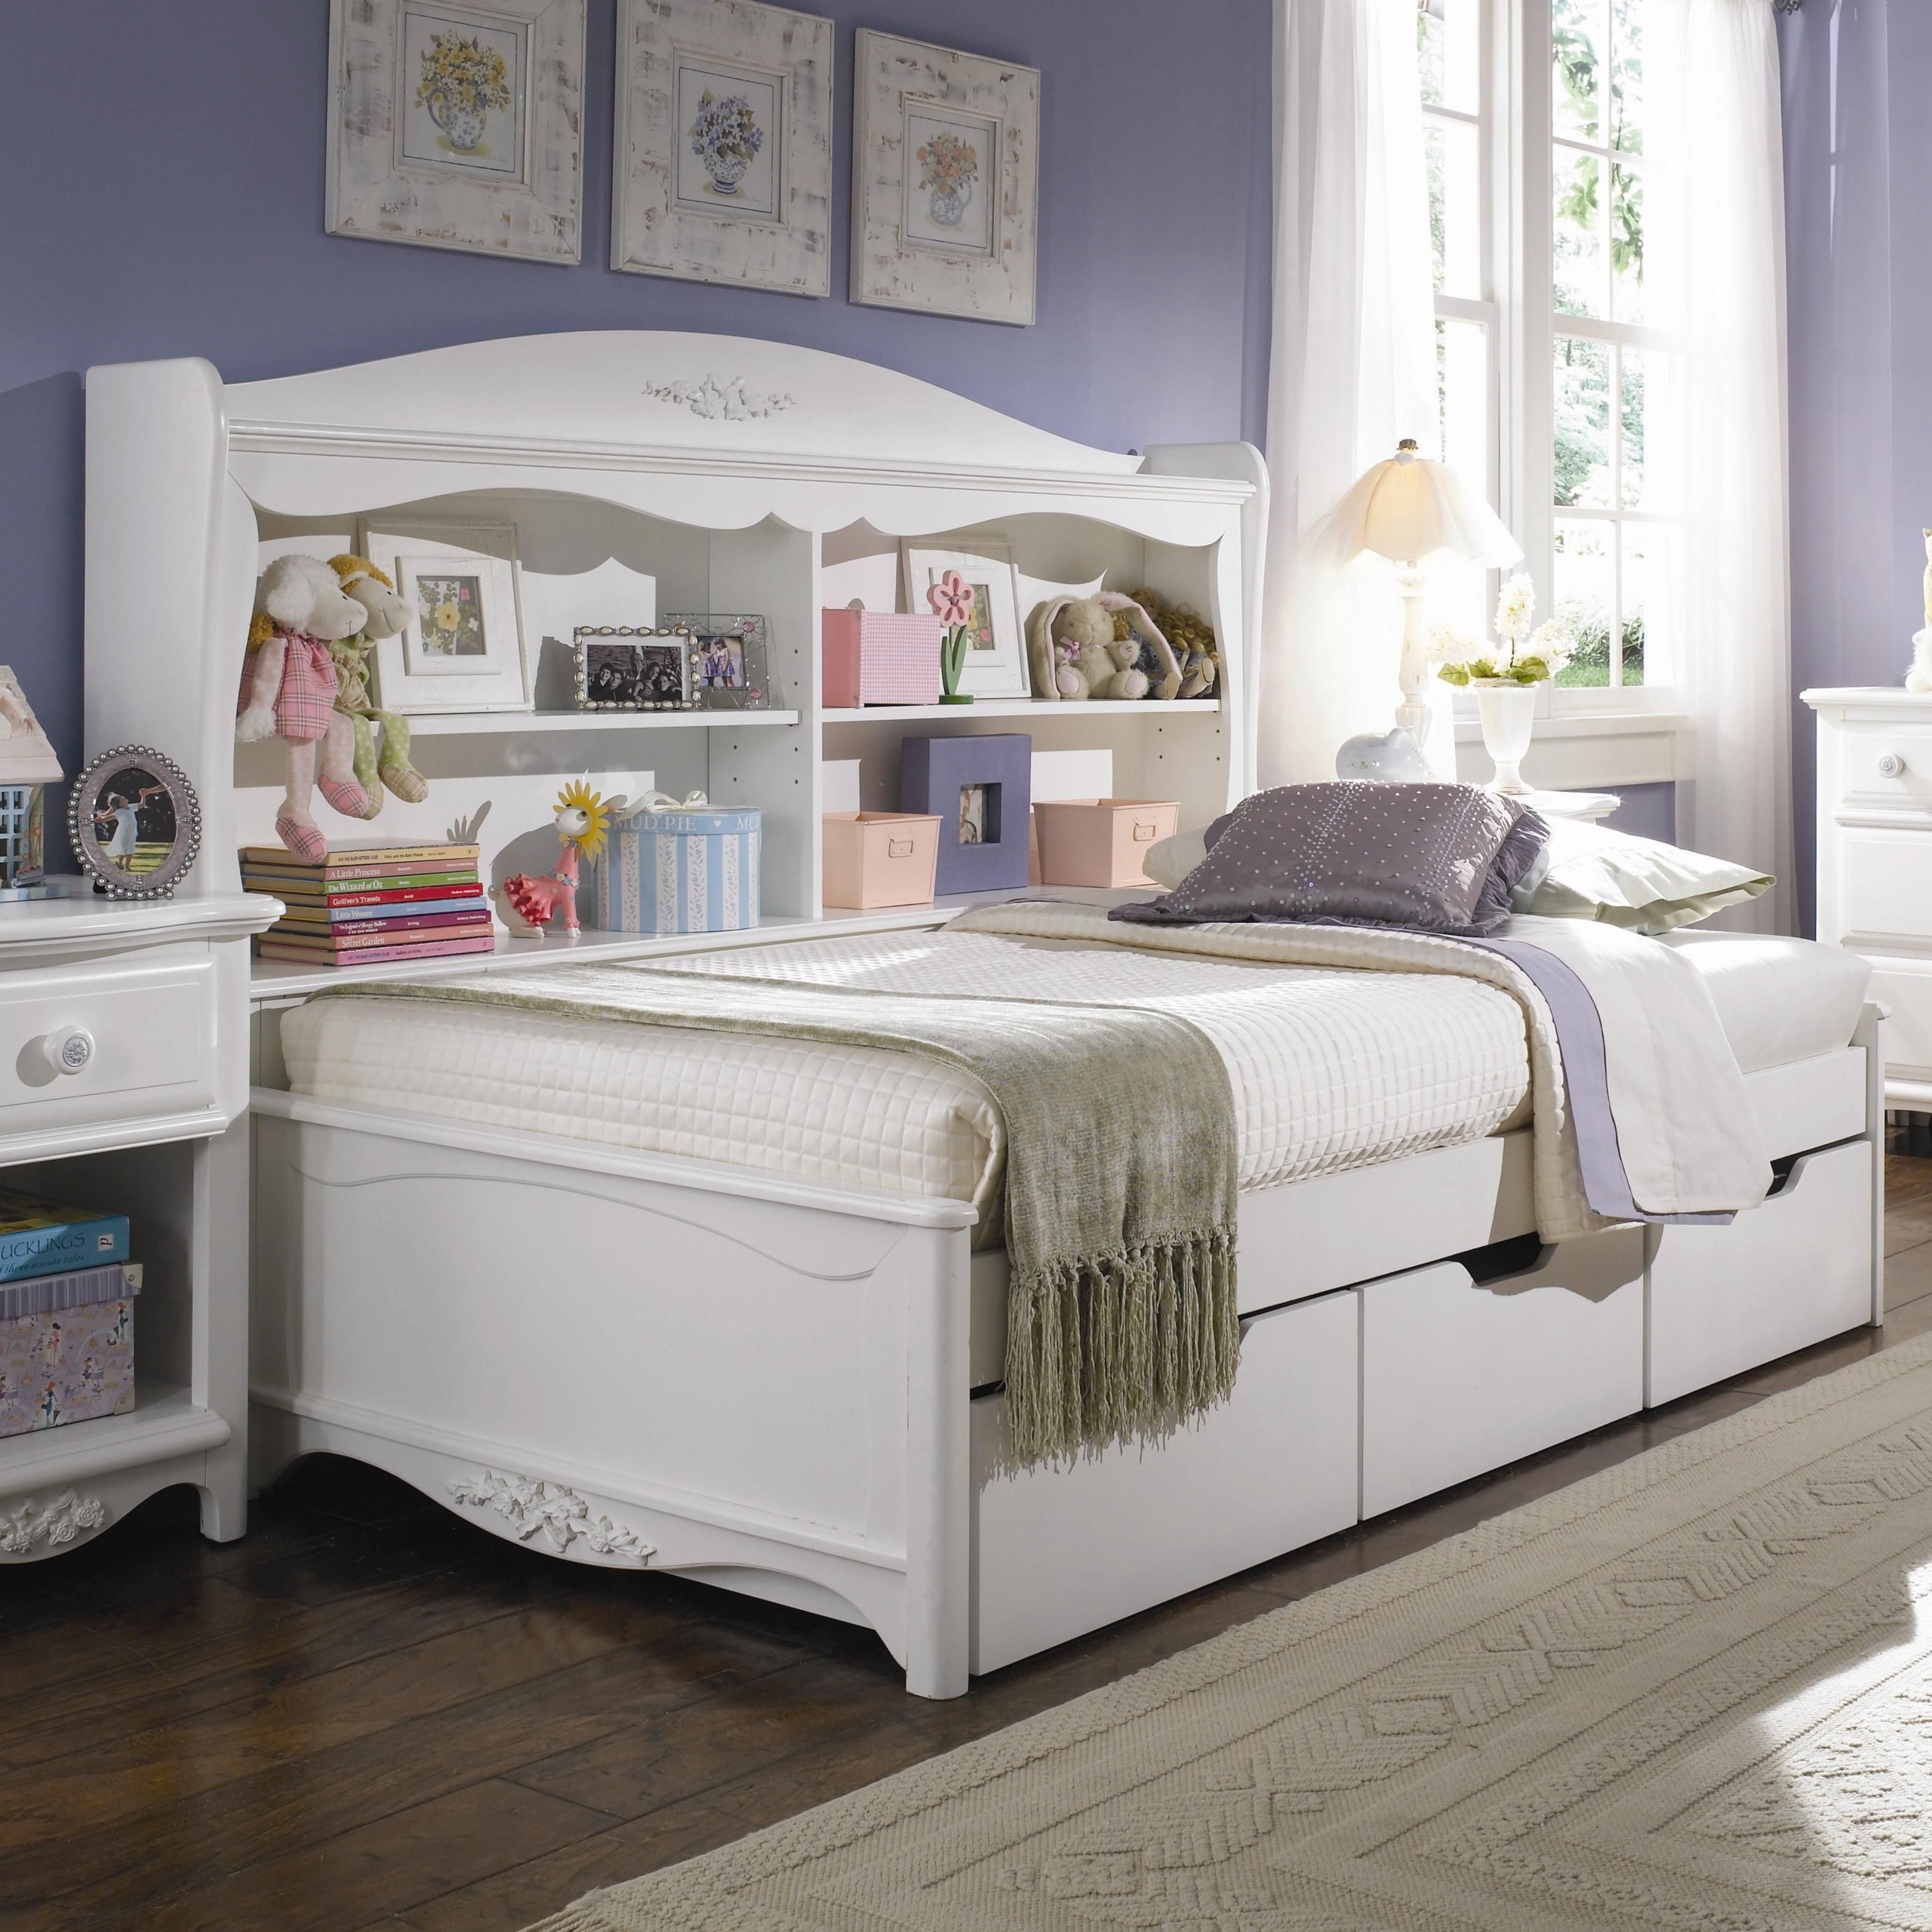 Home bedroom daybed lea industries haley full platform bed with